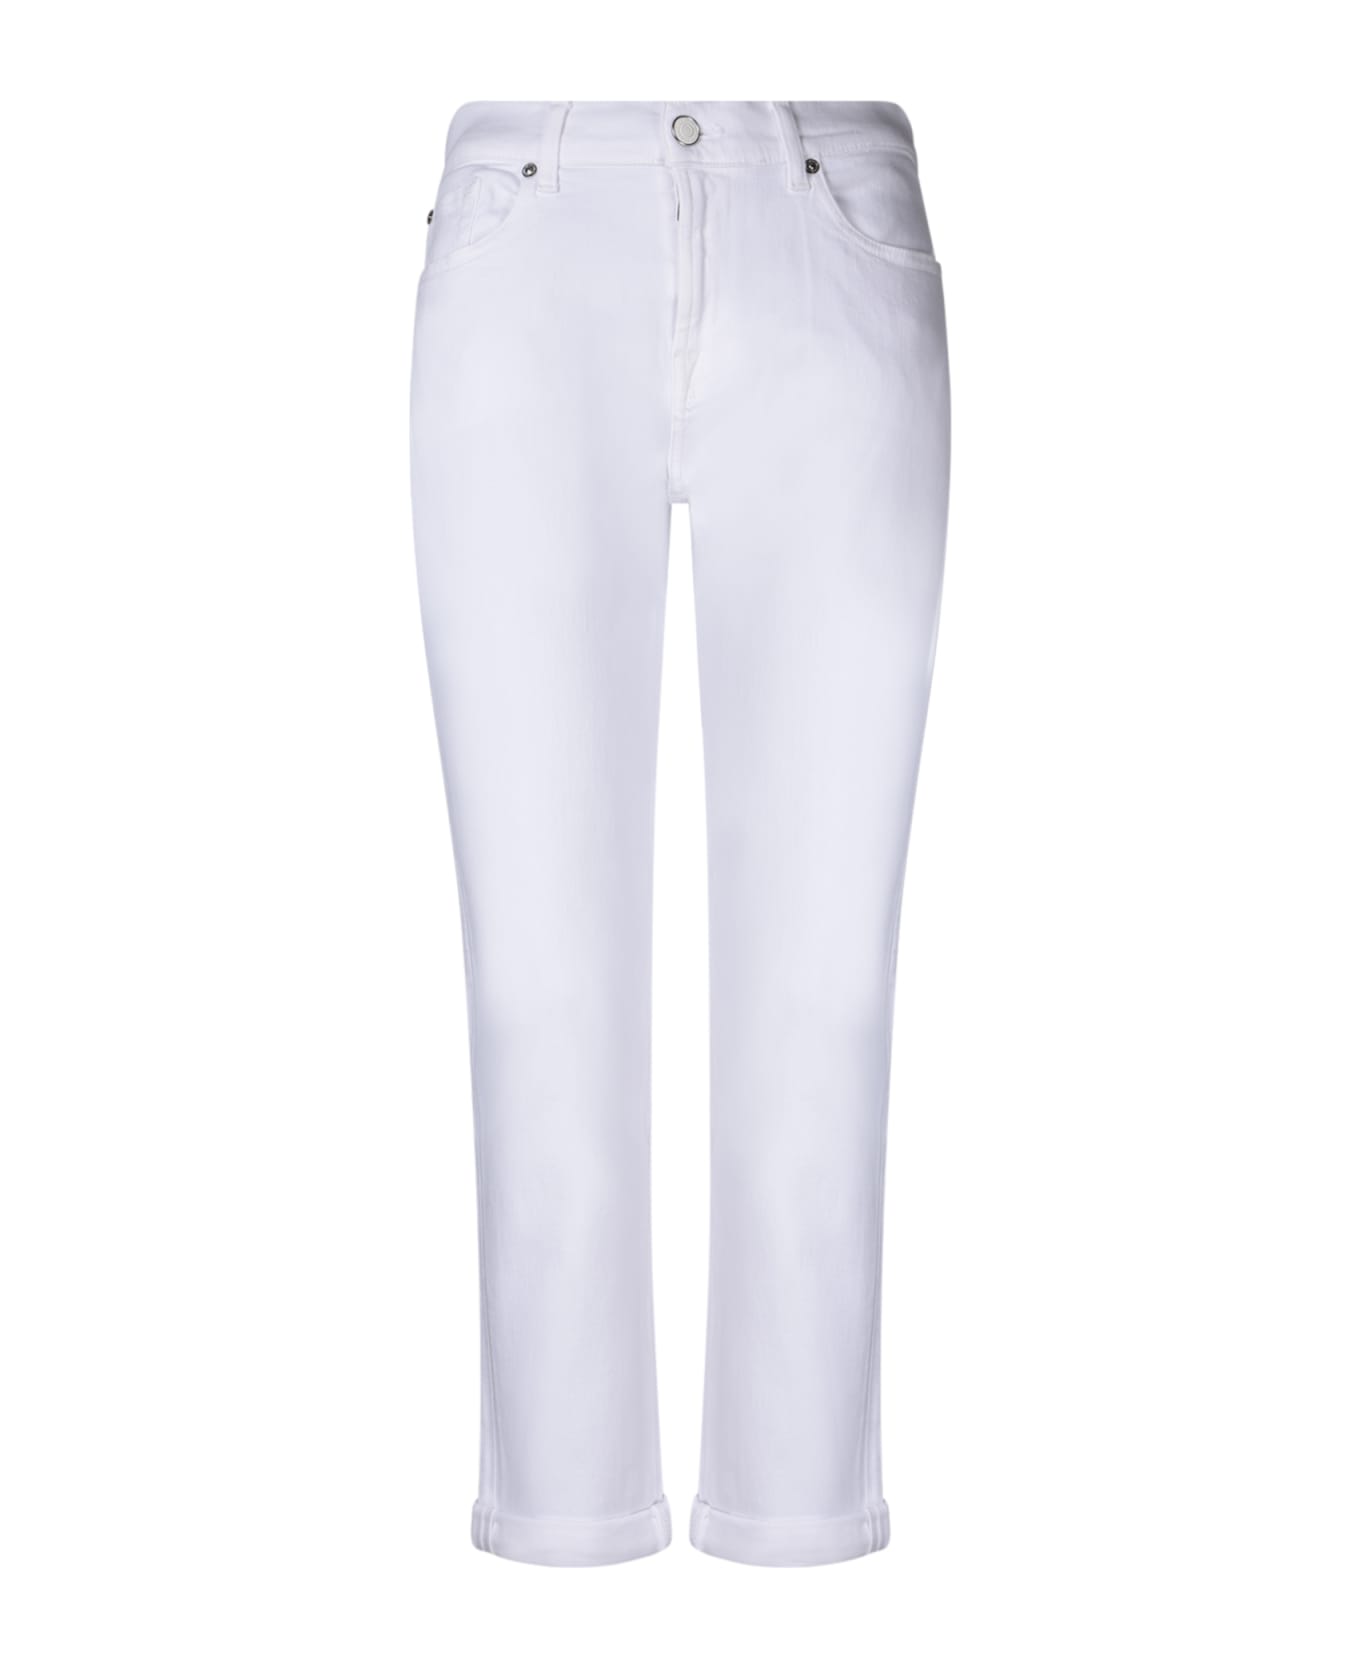 7 For All Mankind Josefina White Jeans By 7 For All Mankind - White デニム